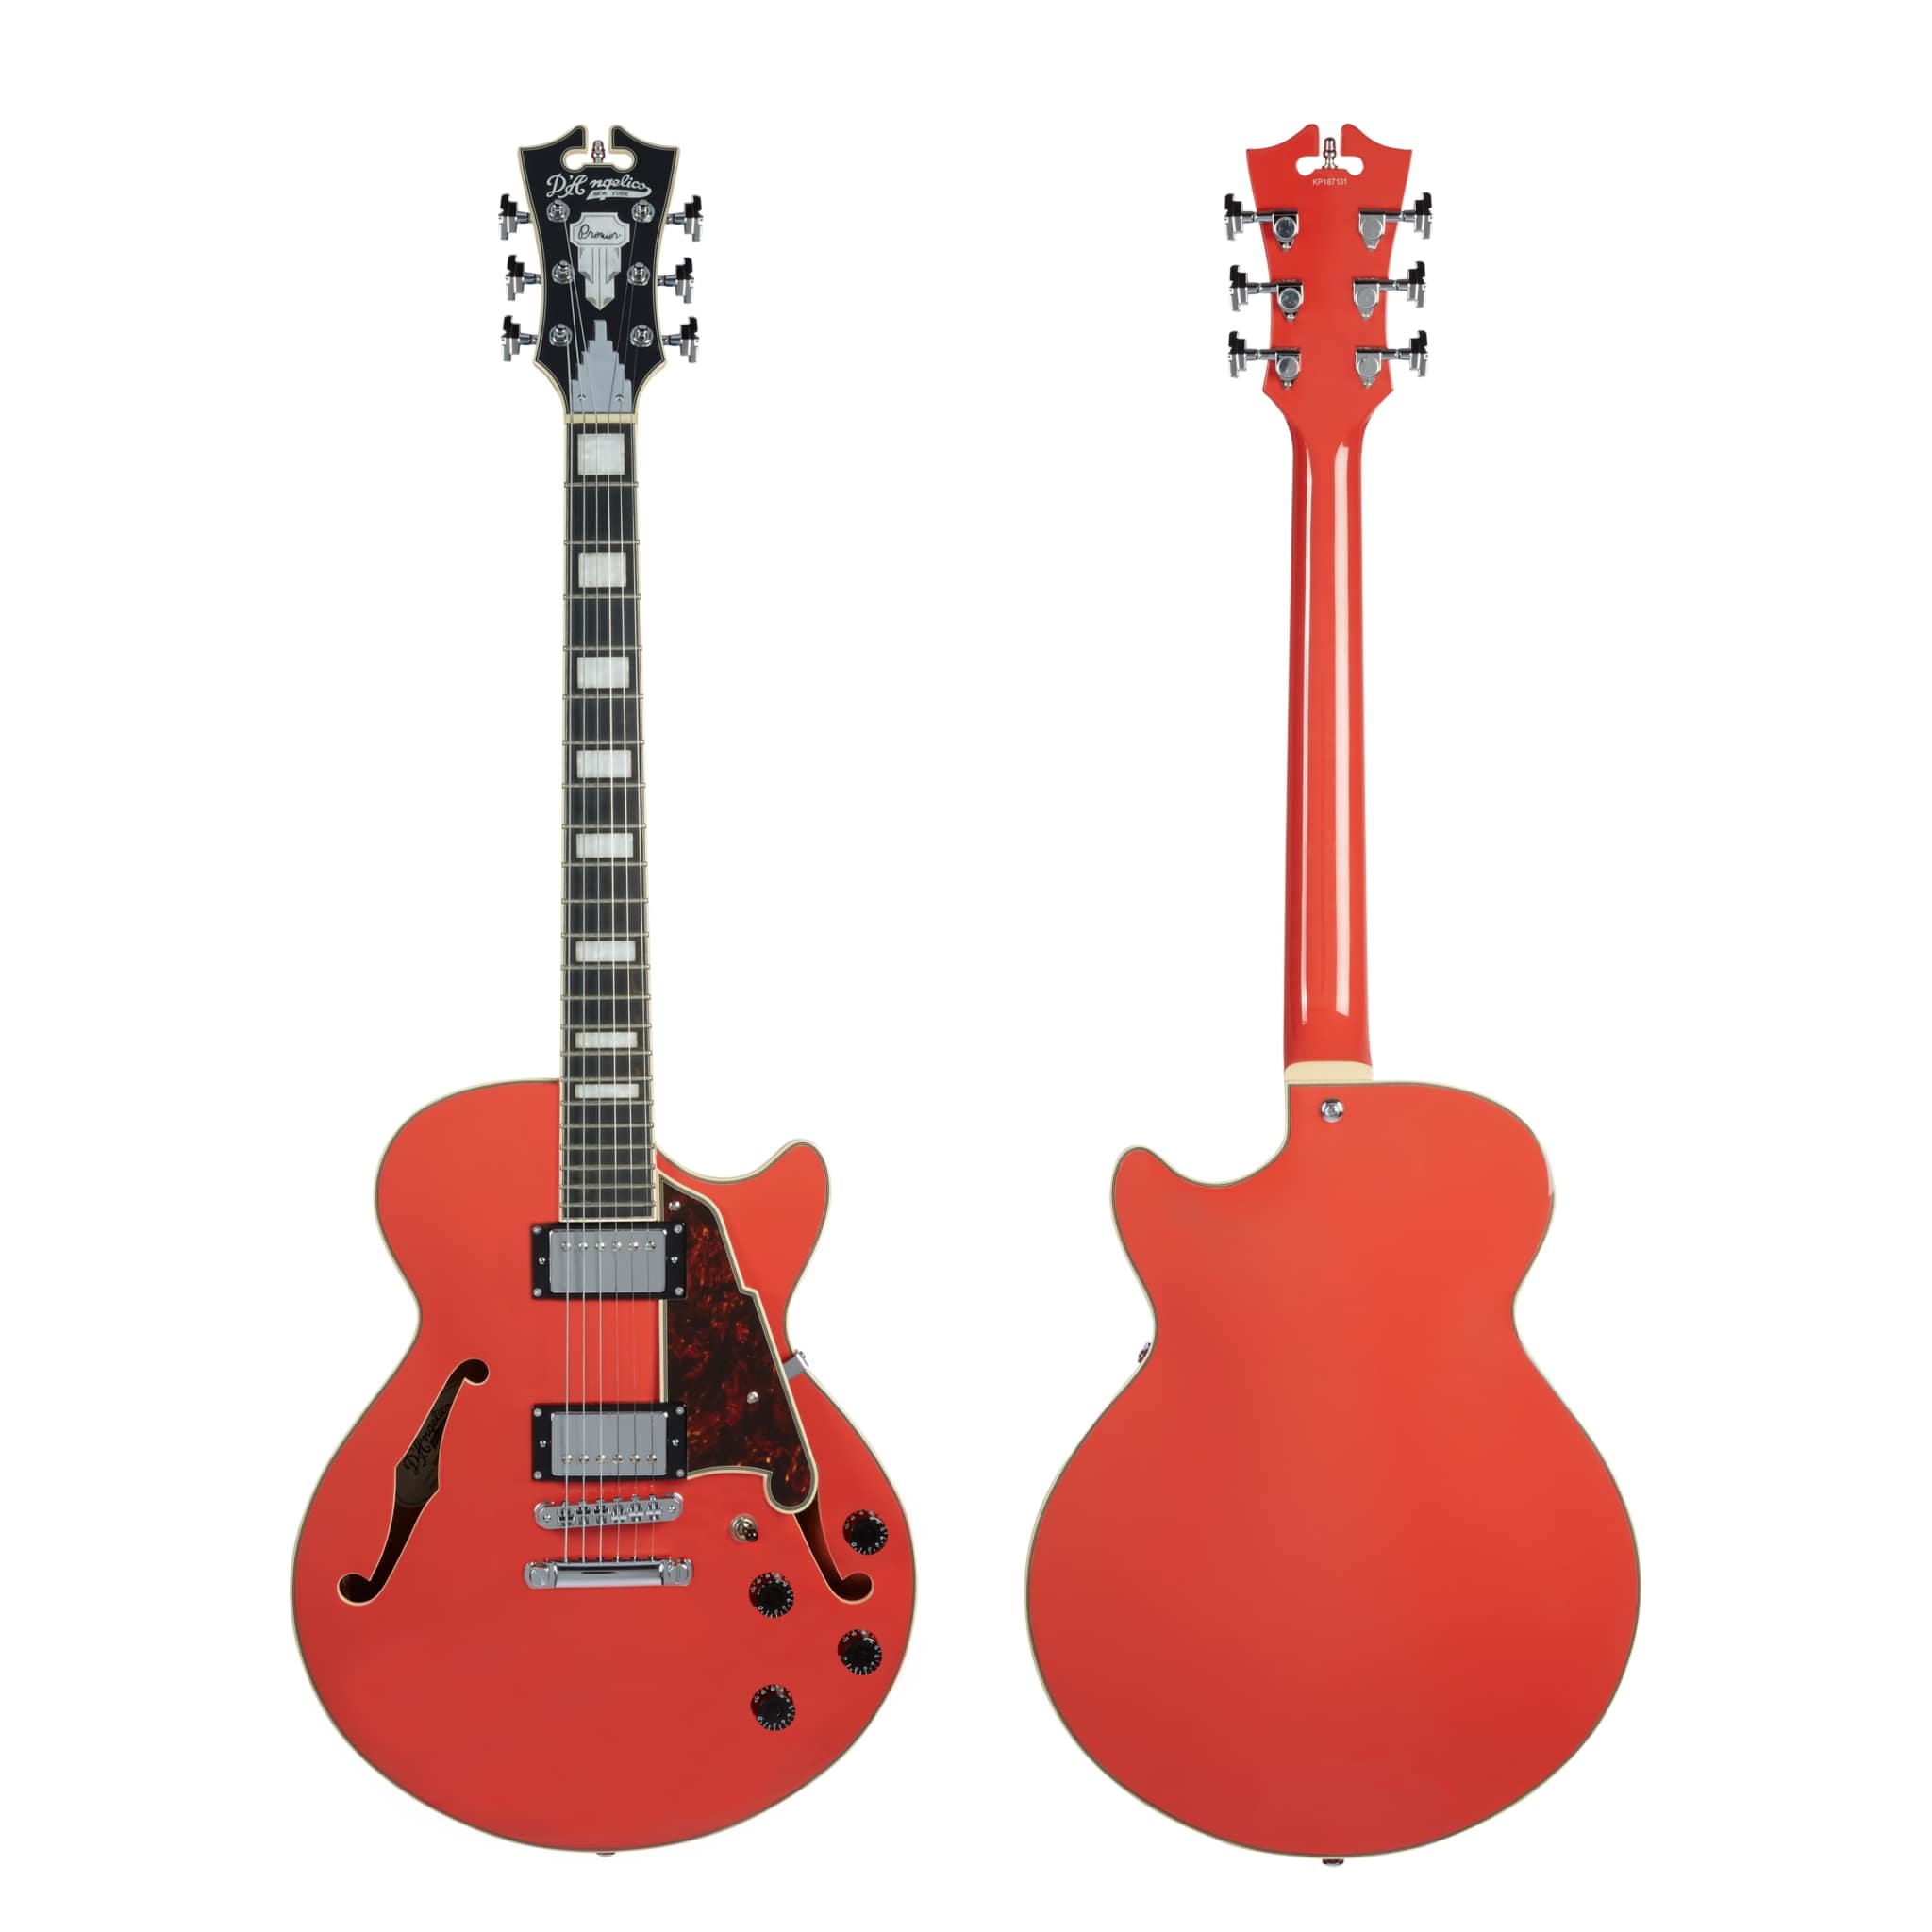 D'Angelico Premier SS Semi-hollow Electric Guitar With Stopbar Tailpiece Fiesta Red DAPSSFRCSCB